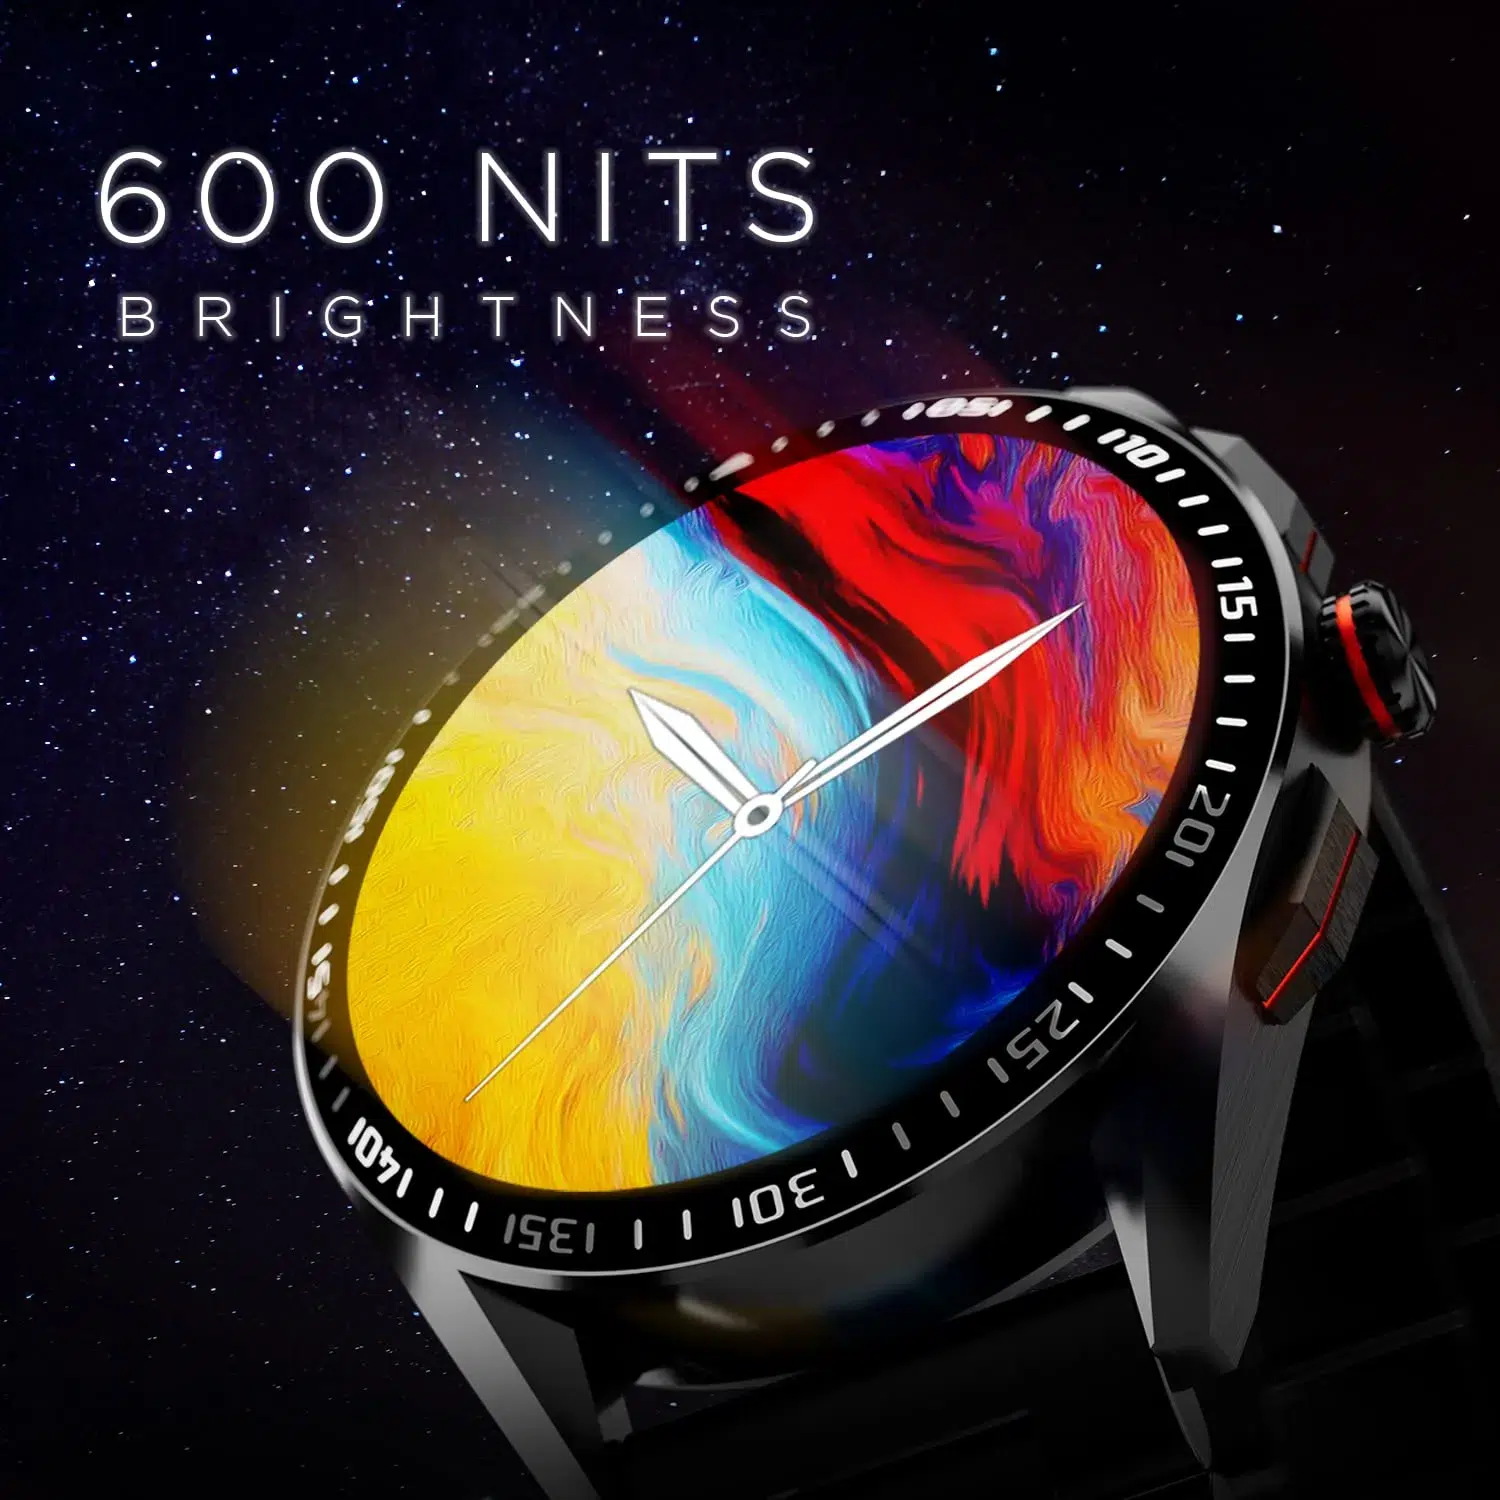 Fire boltt Invincible #firebolttinvincible Bluetooth Calling Smart Watch  with Amoled display available at #tatimes #vadodara Upto 40% Off On all...  | By T.A TIMES | Facebook